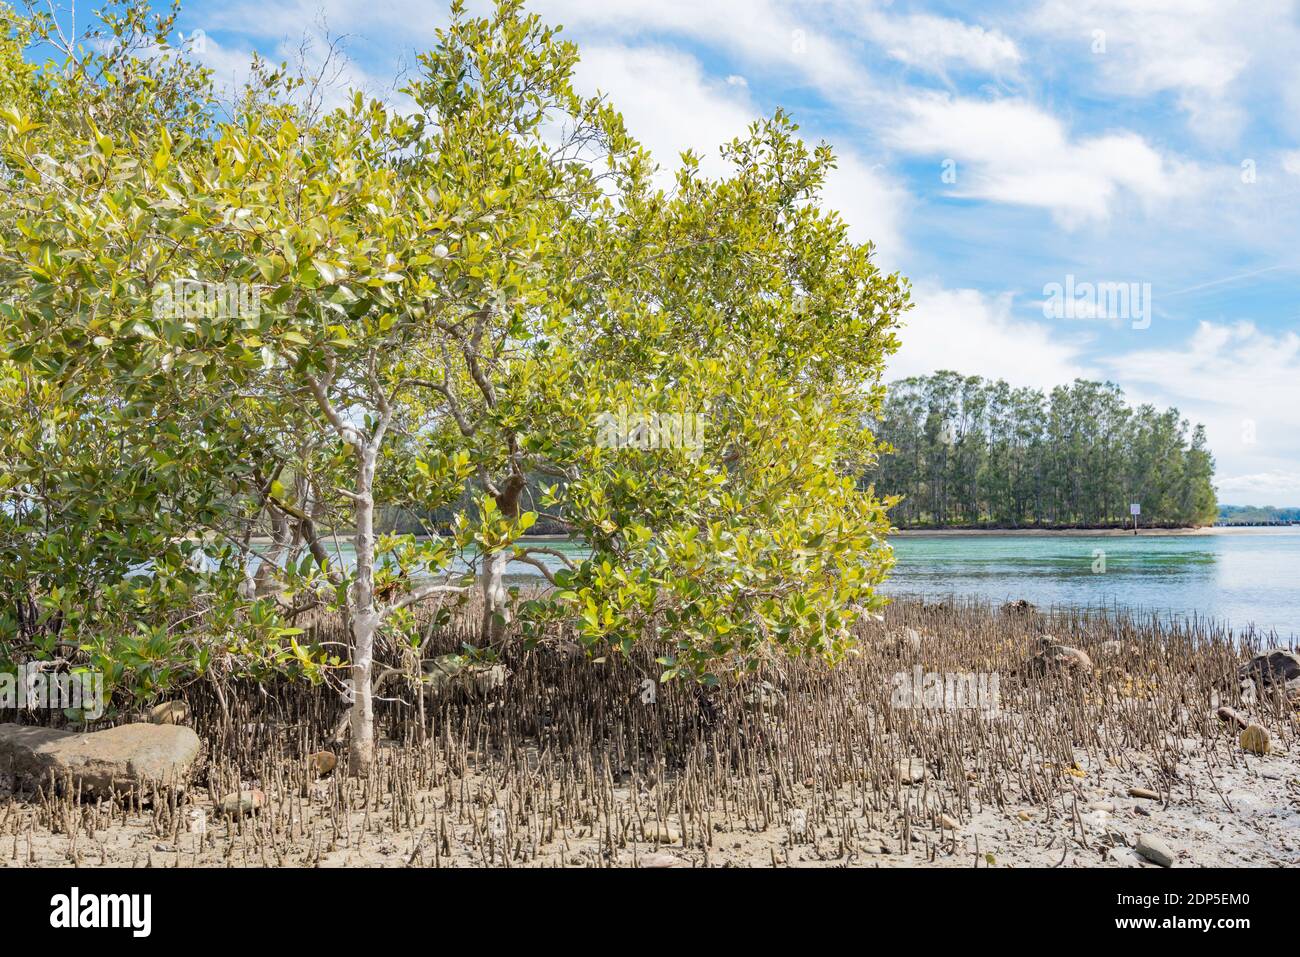 River Mangroves (Aegiceras corniculatum) exposed by the low tide on the banks of the Coolongolook River near Forster, New South Wales, Australia Stock Photo